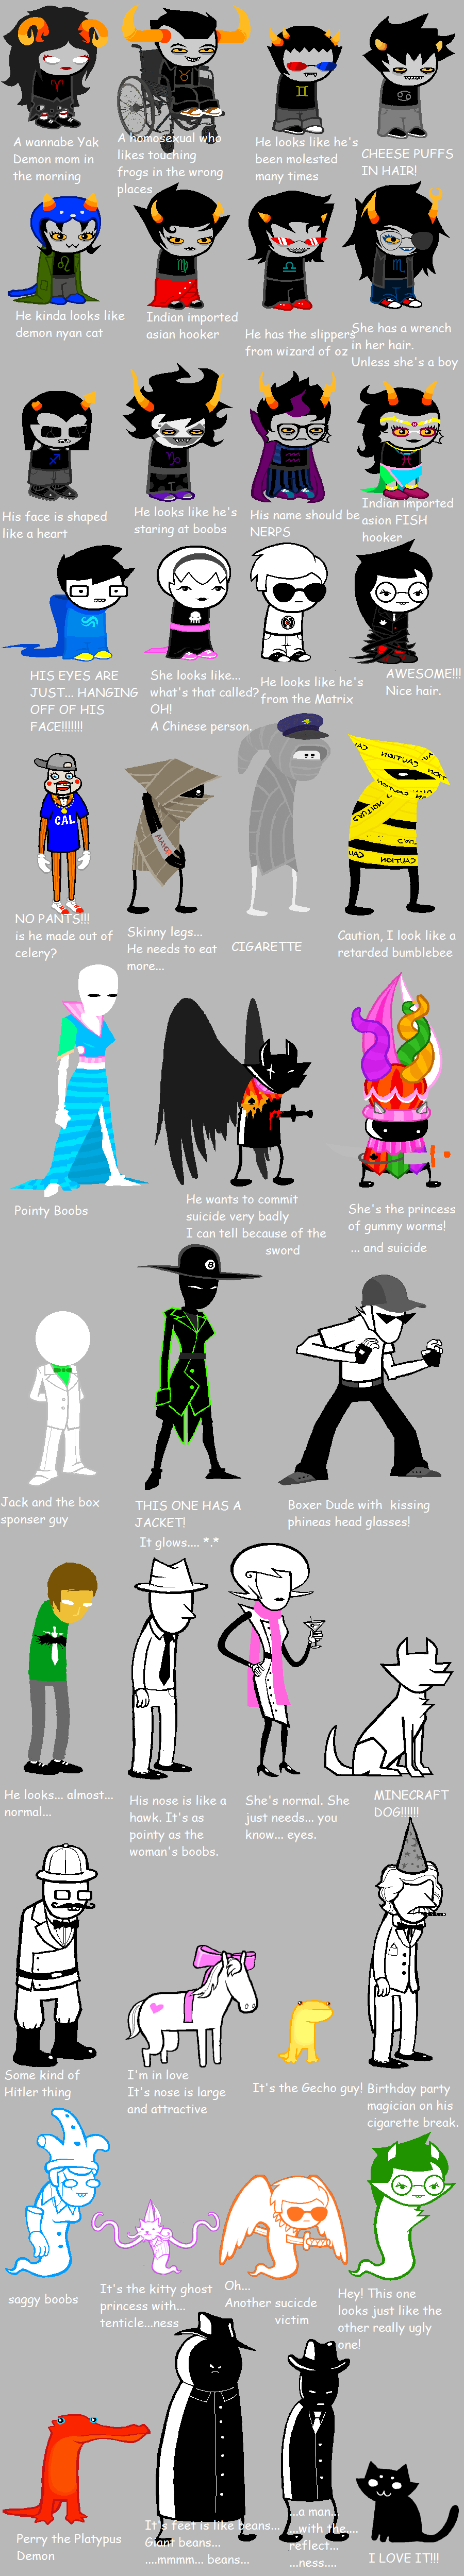 Homestuck according to my sister and her friend.